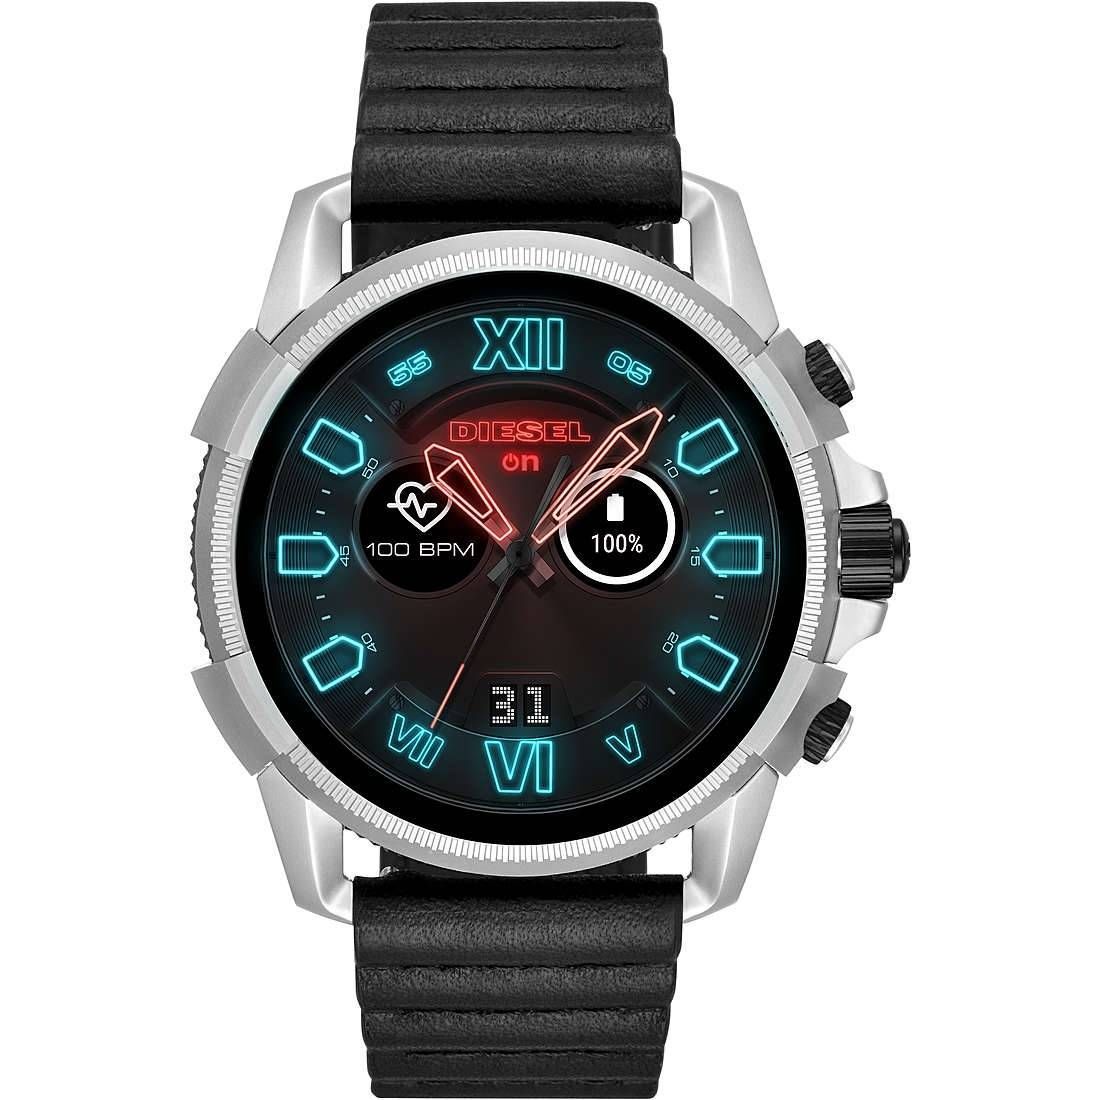 DIESEL On Full Guard Touchscreen Smartwatch Black Leather Strap DT2009